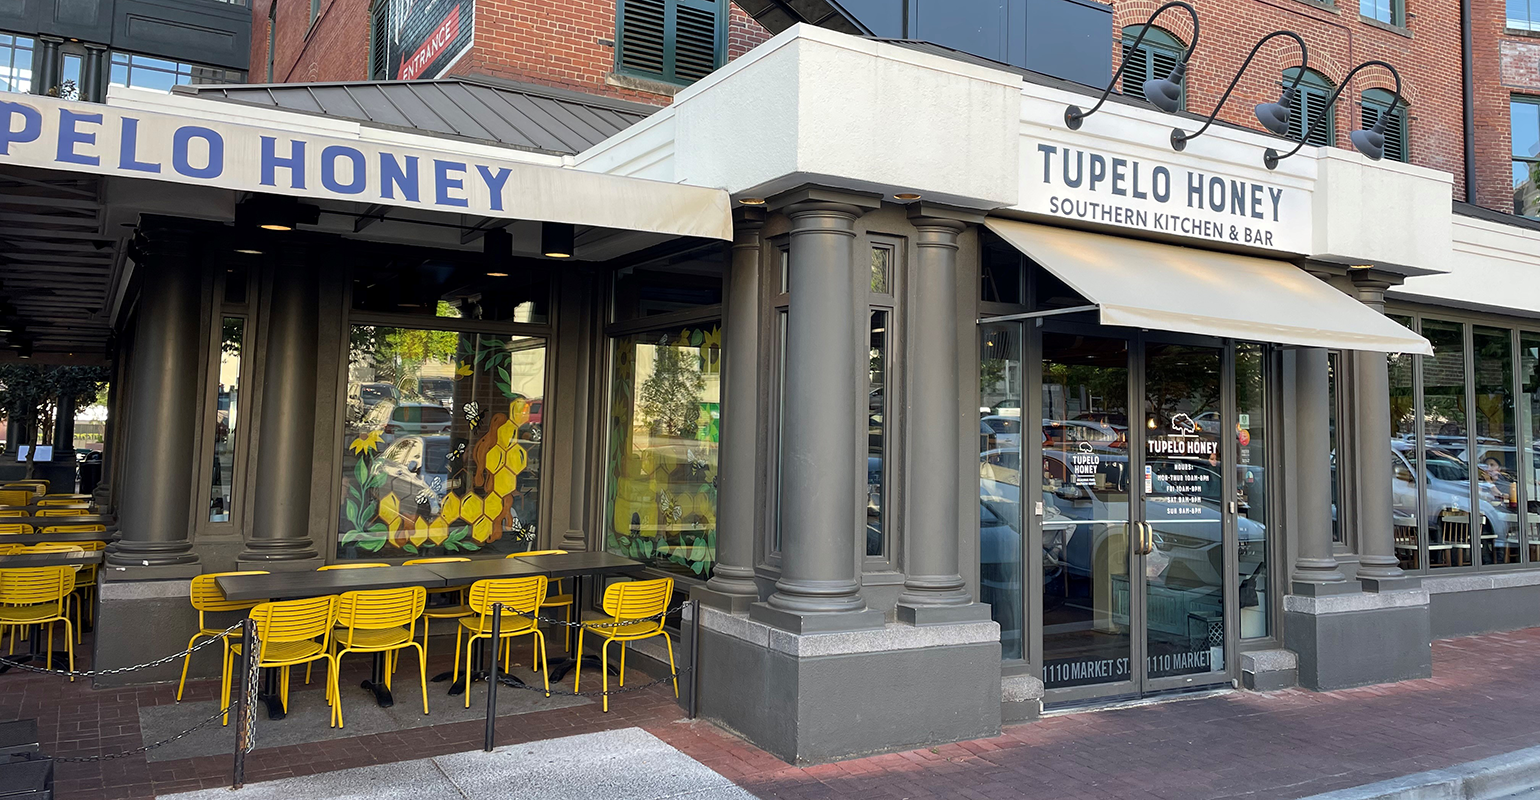 Tupelo Honey's approach to its workforce is driving growth